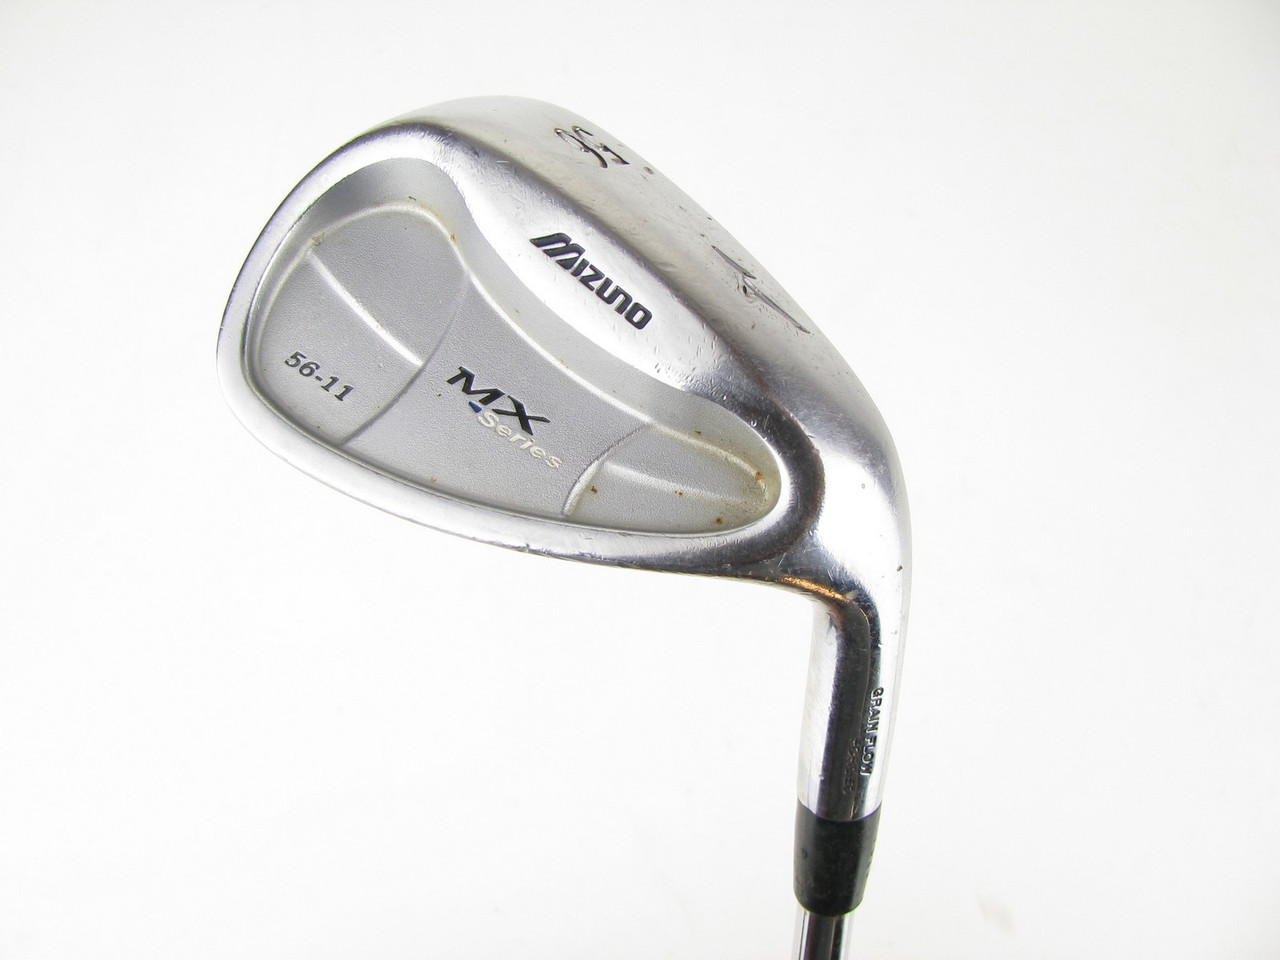 Mizuno MX Series Sand Wedge 56 degree 56-11 w/ Steel R300 (Out of Stock) -  Clubs n Covers Golf